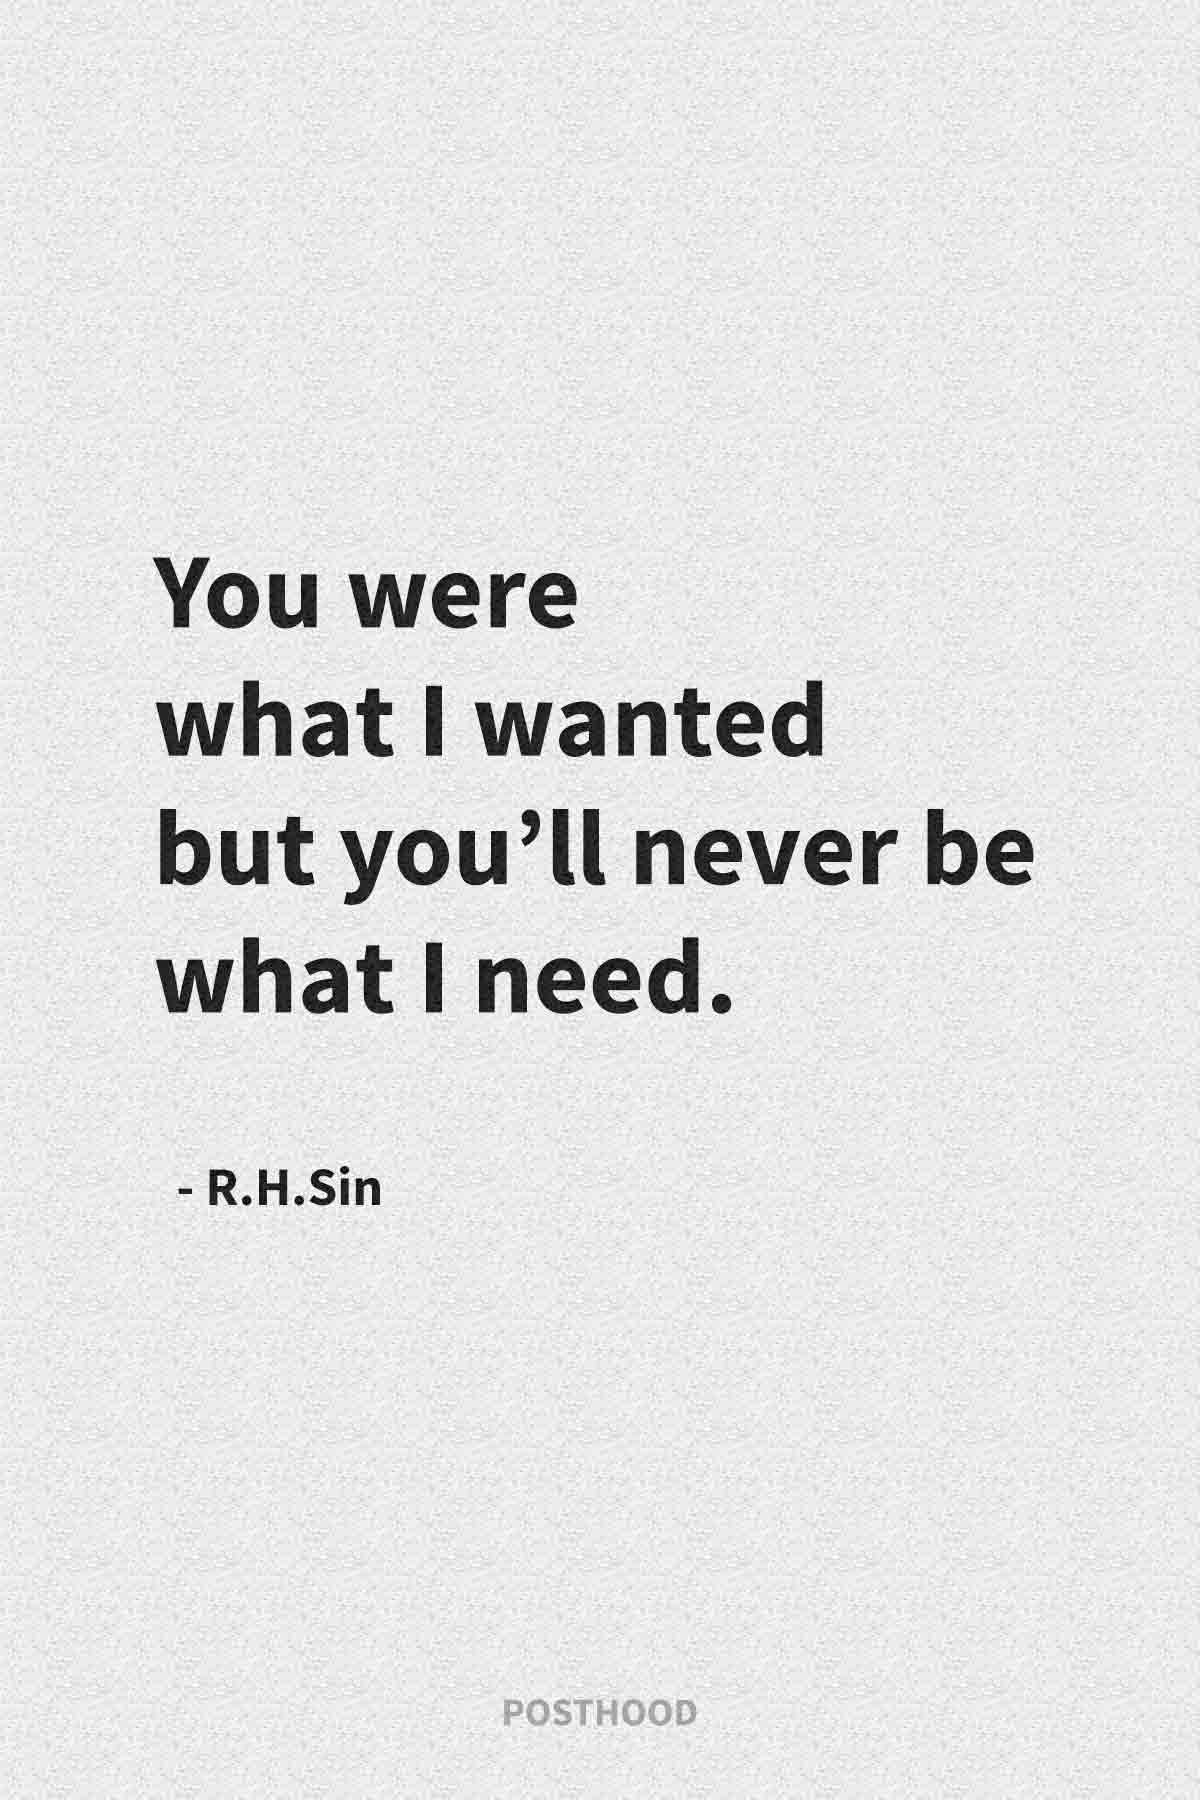 40 R.H.Sin quotes to heal your soul and show you the right path about love, relationship, life, and people. Best self-love boosting quotes for you.